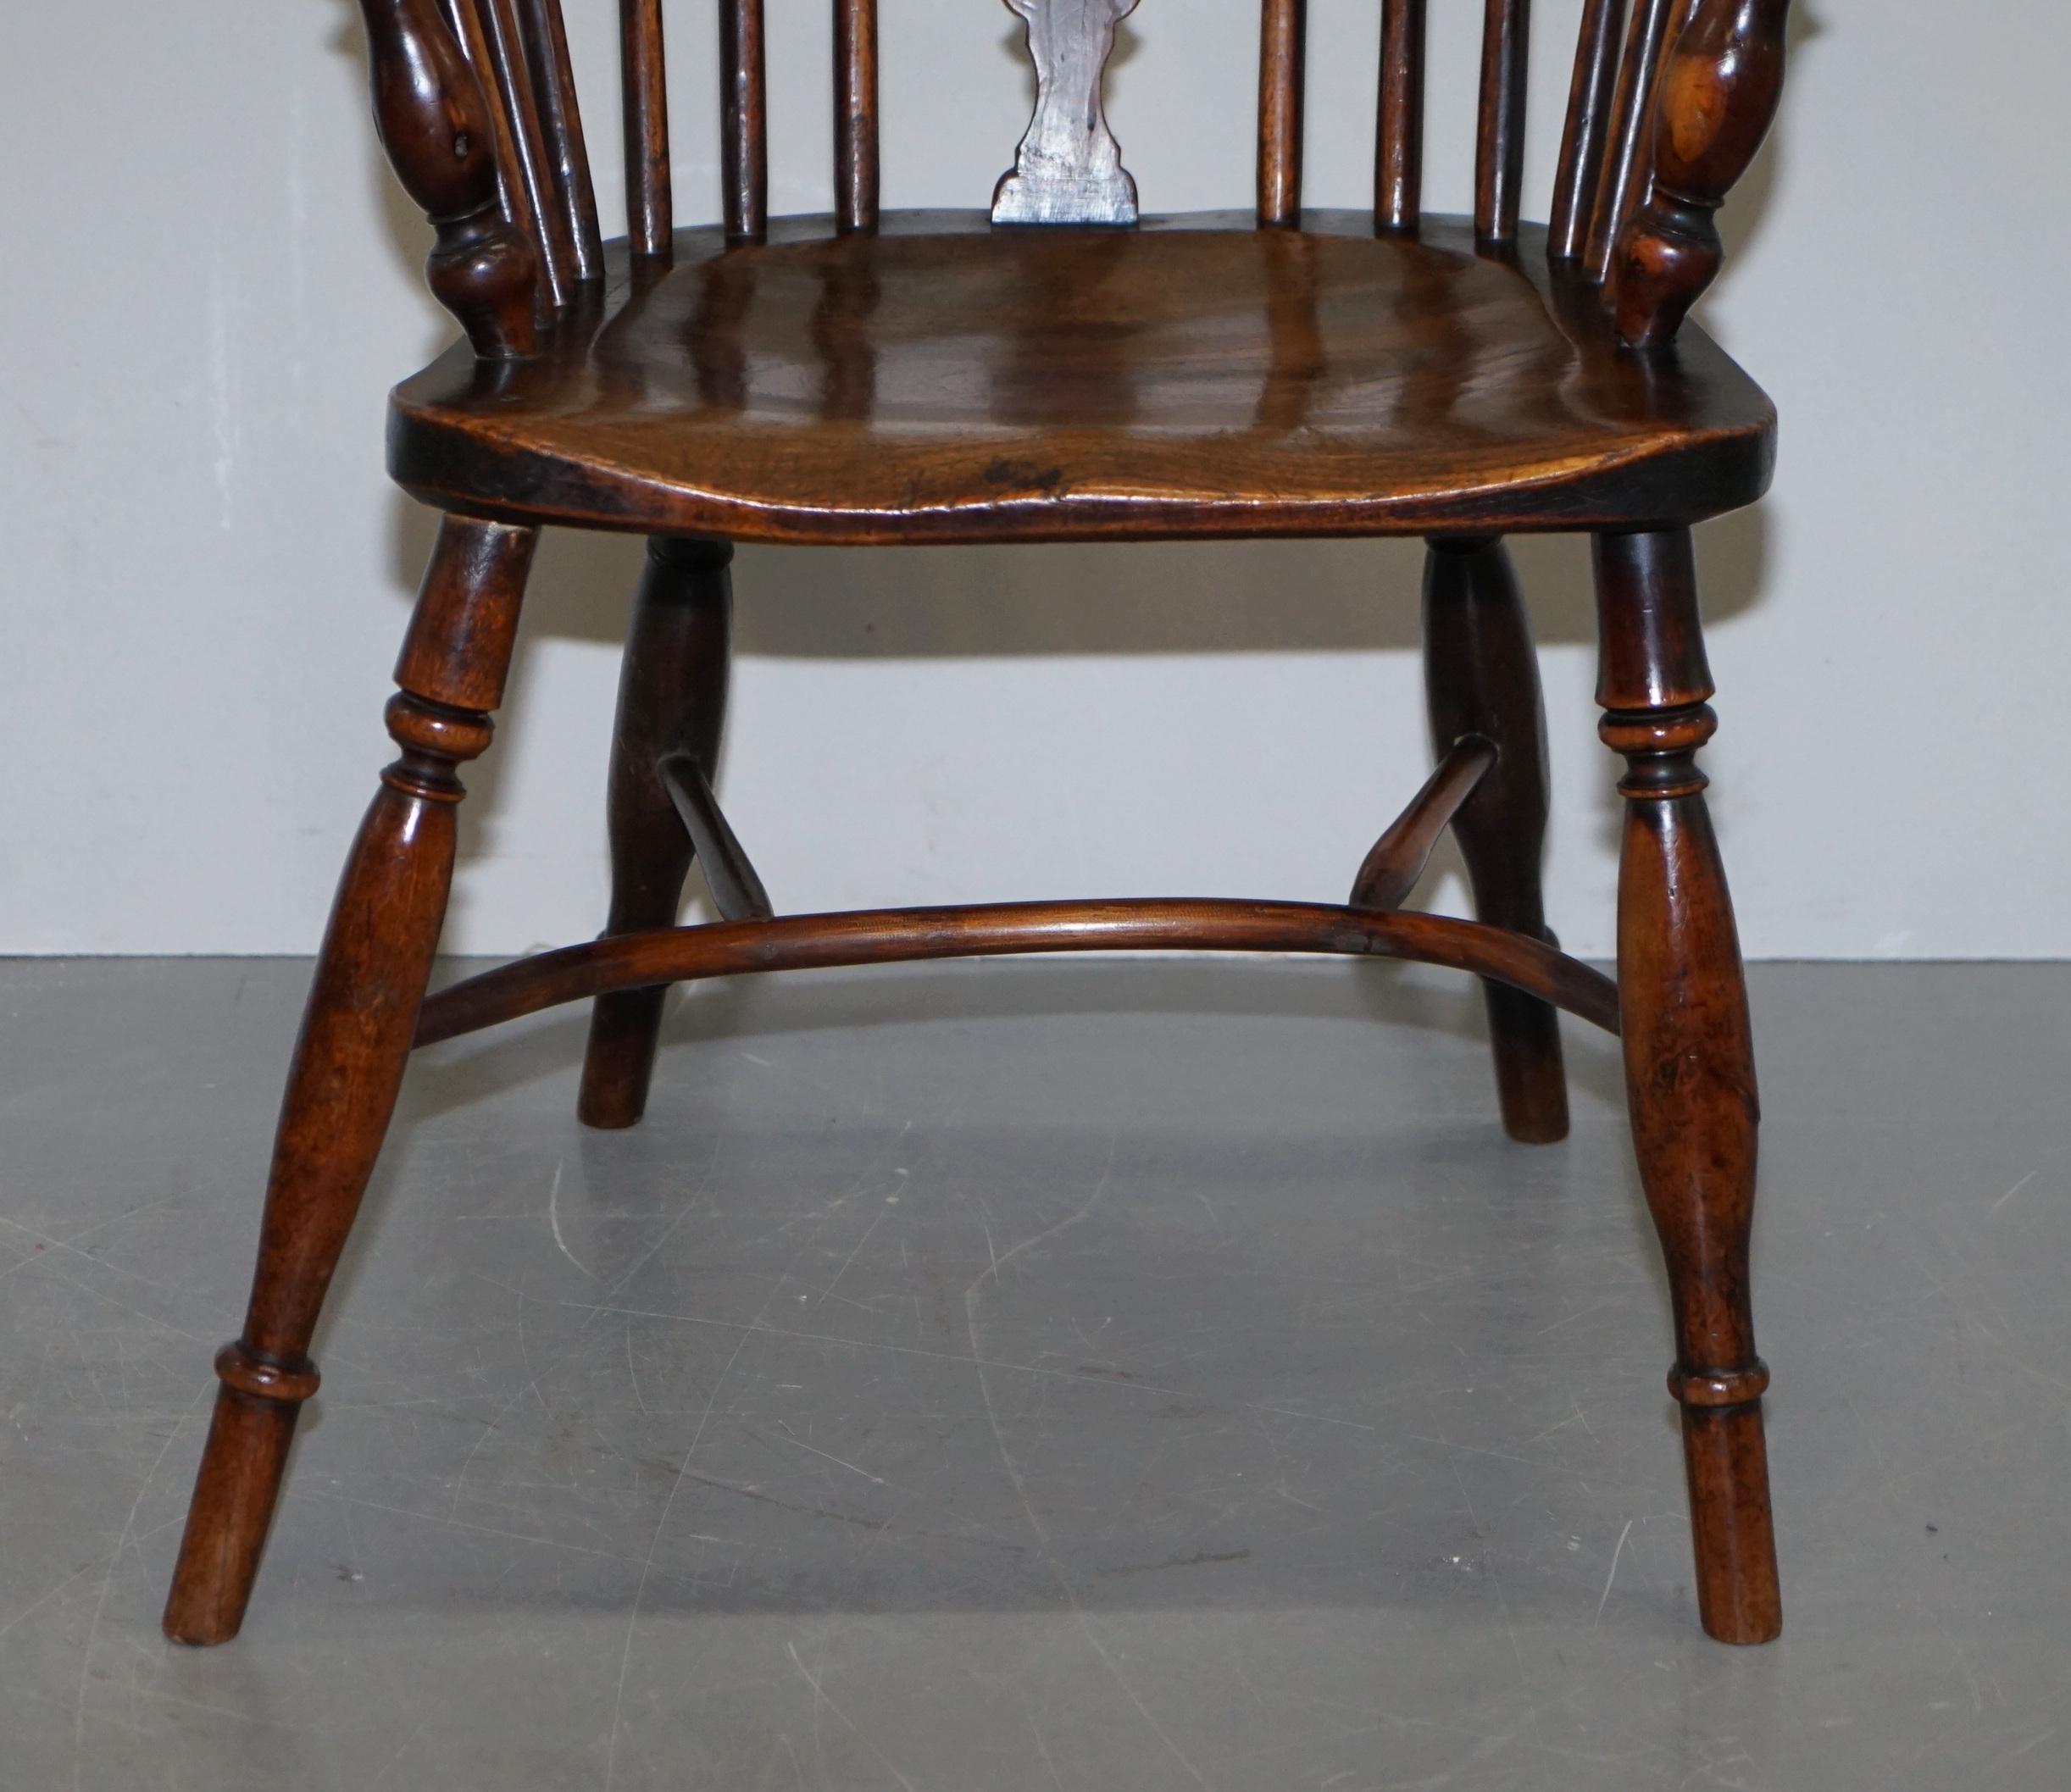 1 of 6 Burr Yew Wood and Elm Windsor Armchairs circa 1860 English Country House 8